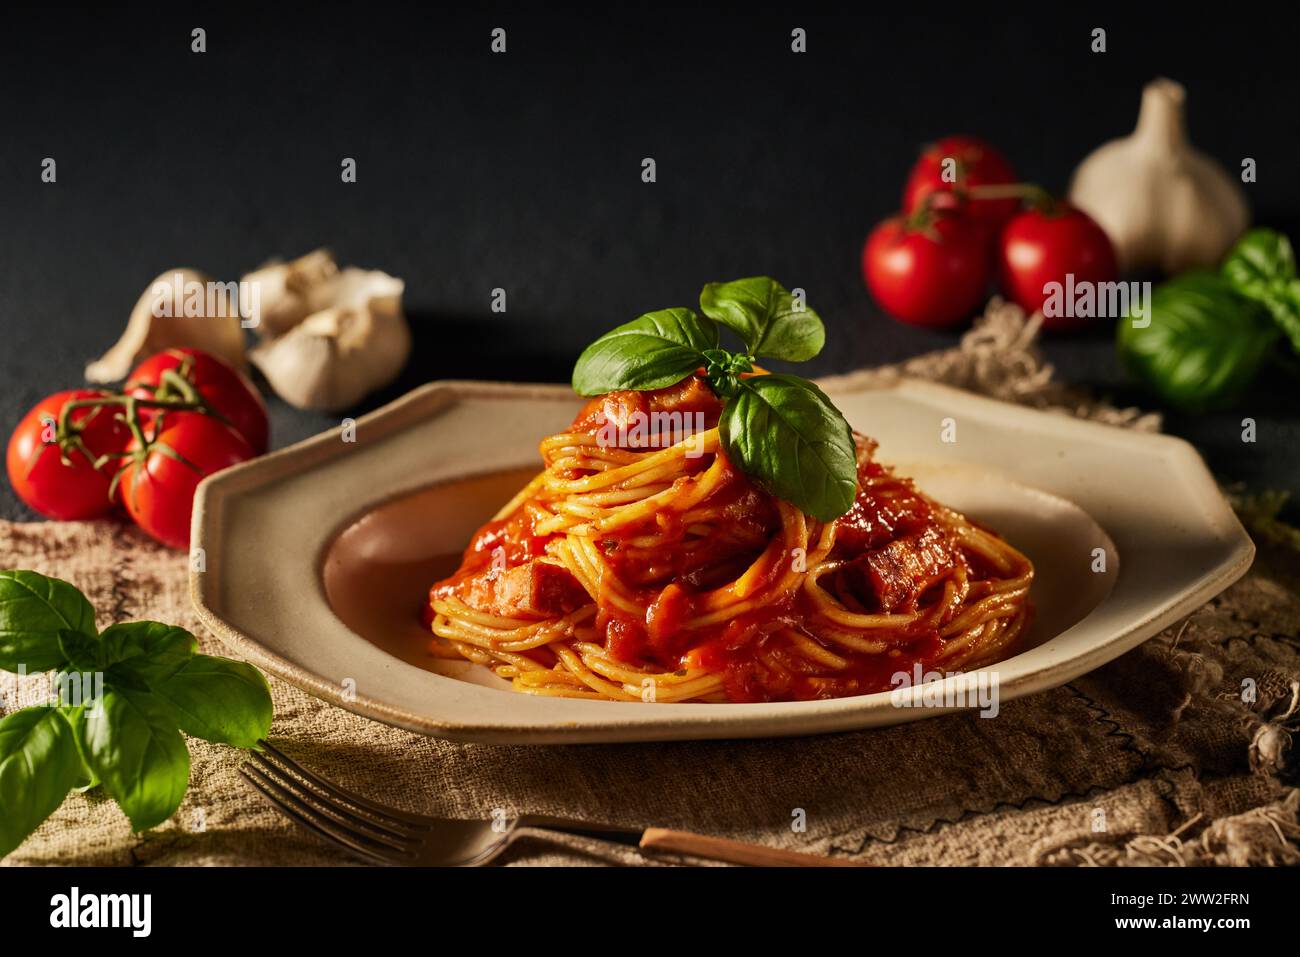 Spaghetti with tomato sauce and basil leaves on a plate Stock Photo